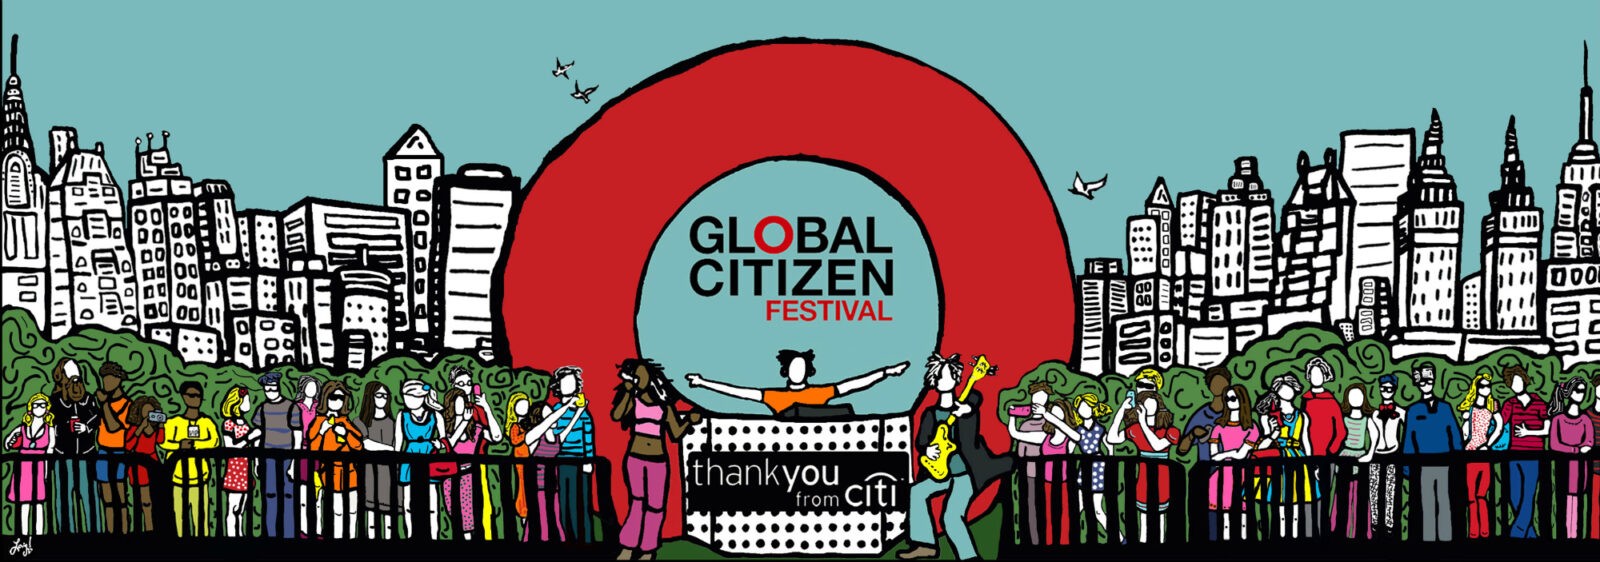 Global Citizen Concert 2015 NYC